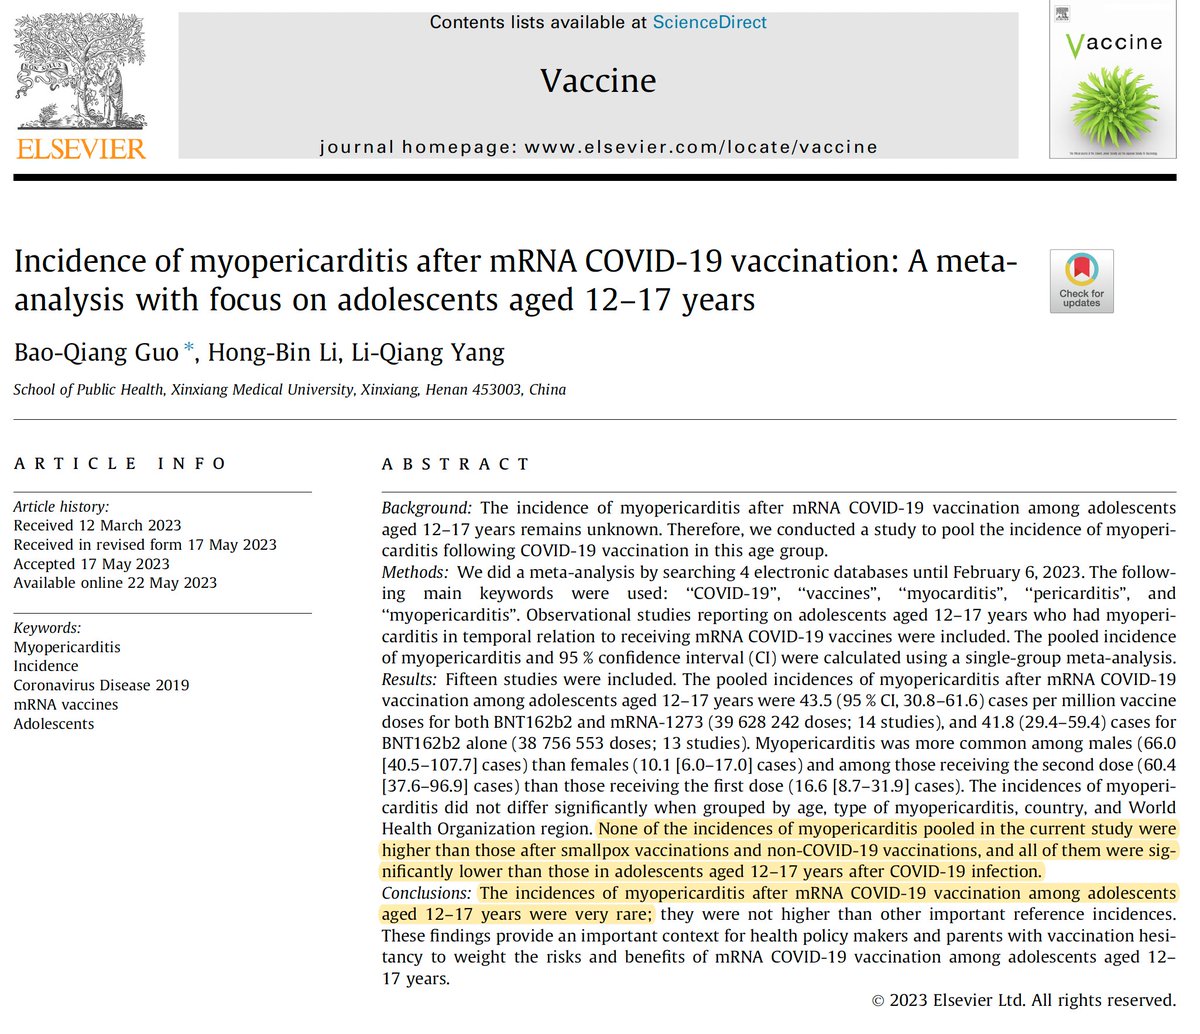 New meta-analysis on risk of myocarditis from COVID infection & vaccination
sciencedirect.com/science/articl…

Risk of myocarditis in teens 12-17:
🔹after COVID💉vaxx was no higher than after other vaccinations.
🔹after COVD INFECTION was SIGNIFICANTLY HIGHER than after COVID vaxx💉.